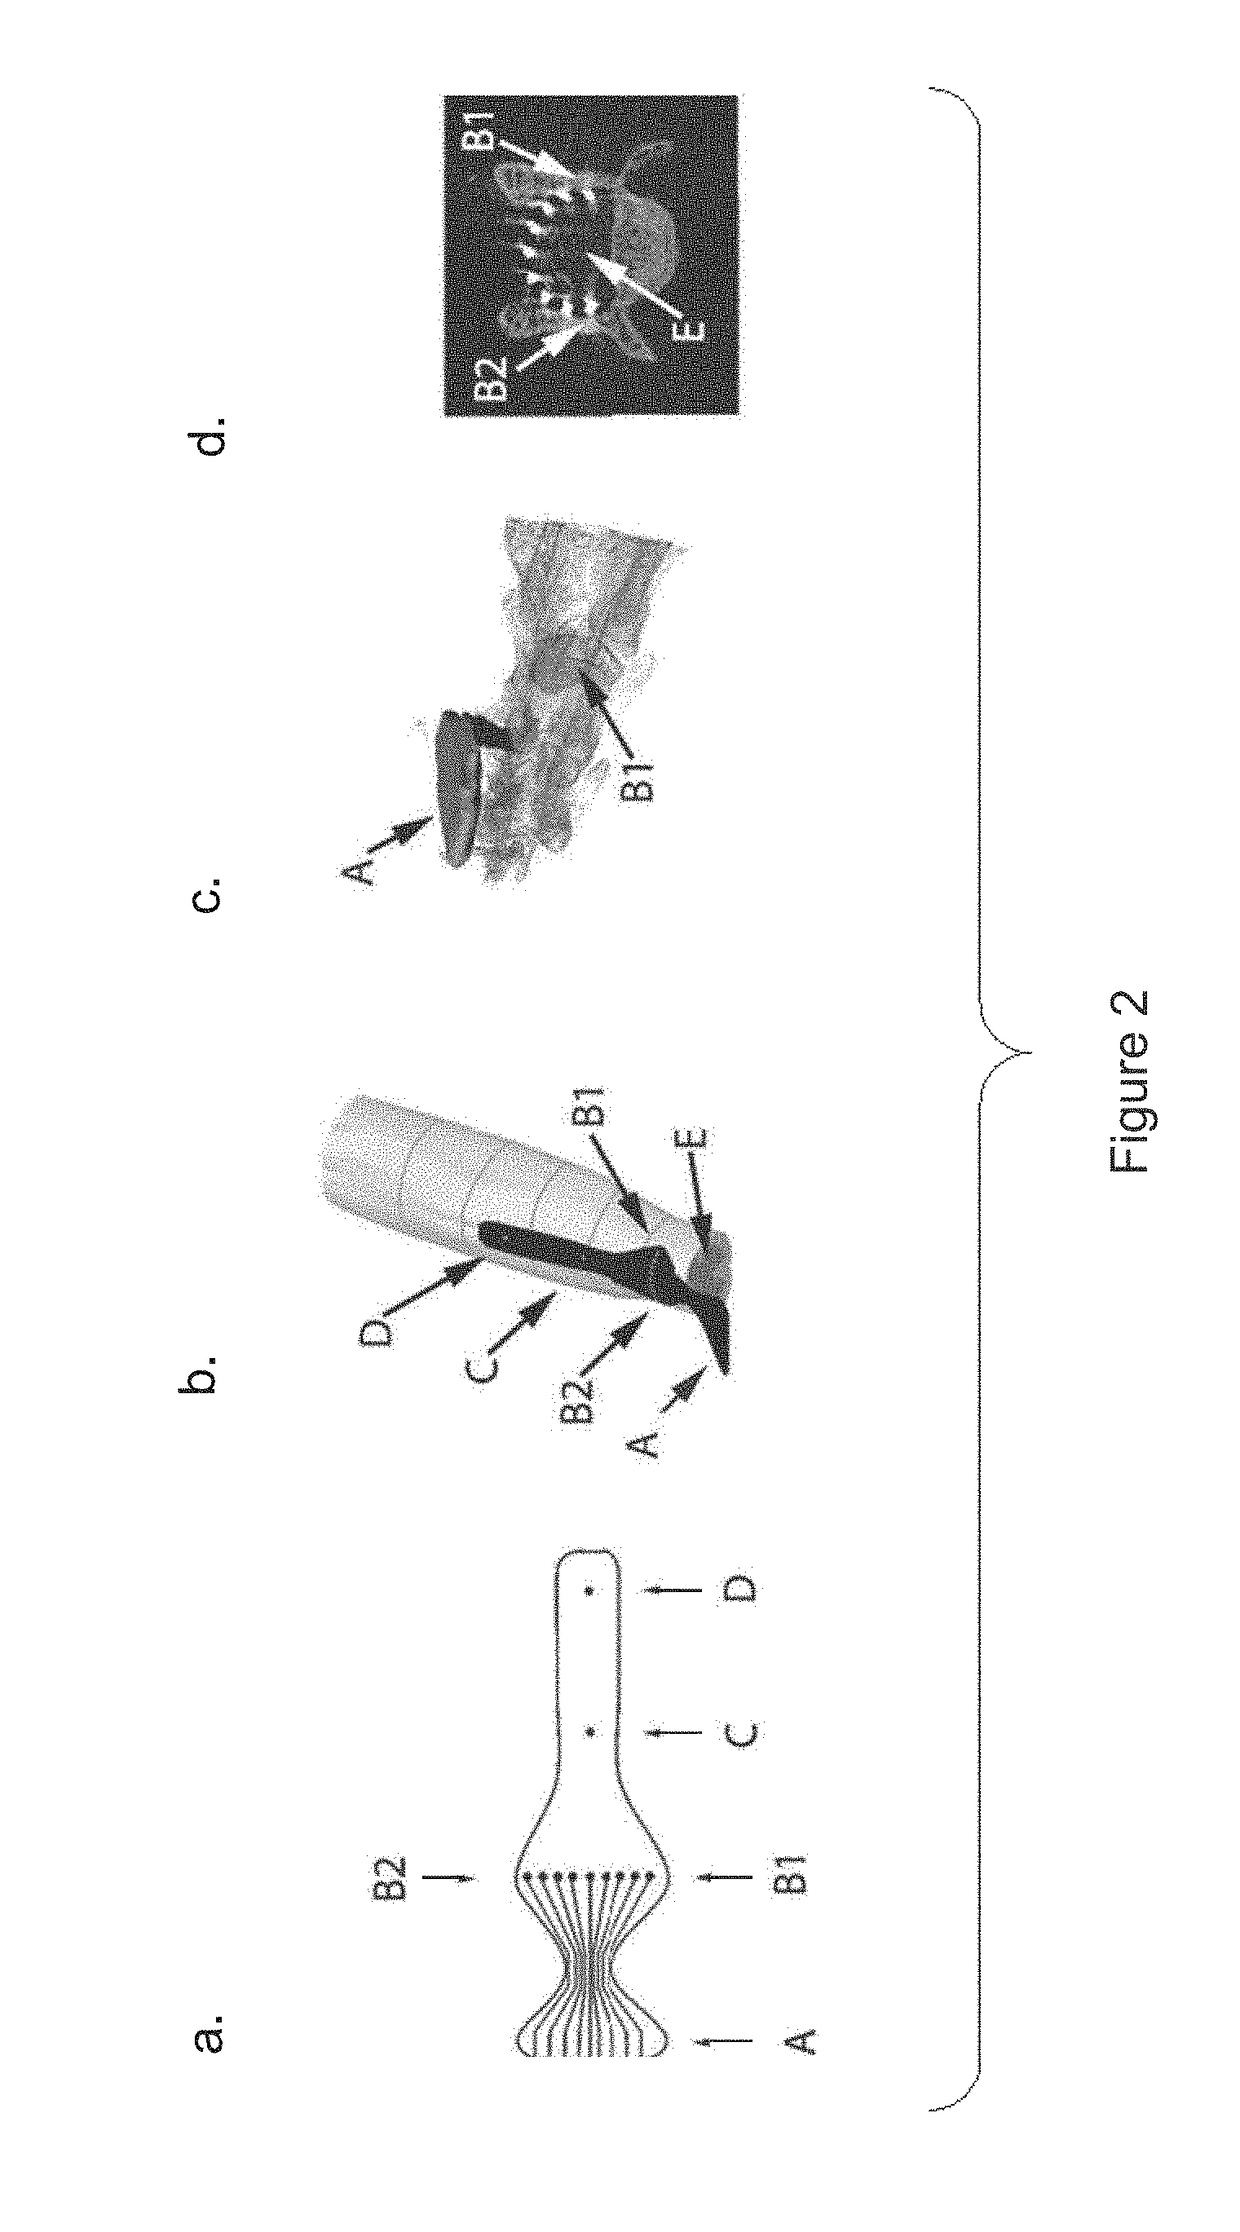 System for selective spatiotemporal stimulation of the spinal cord